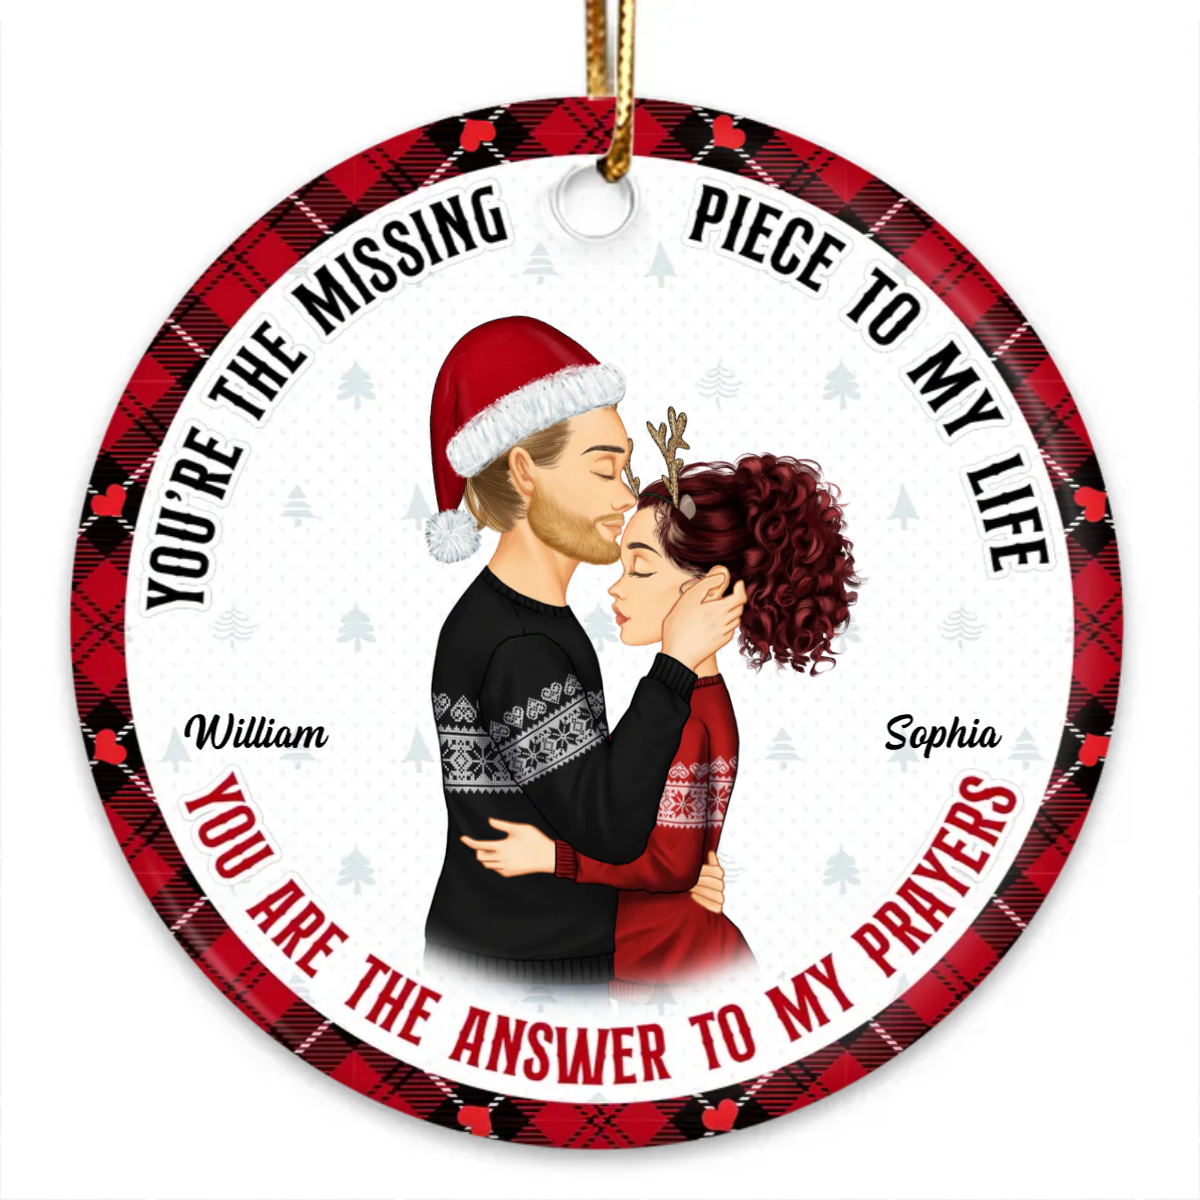 Christmas Gift For Couples - The Missing Piece To My Life - Personalized Circle Ceramic Ornament